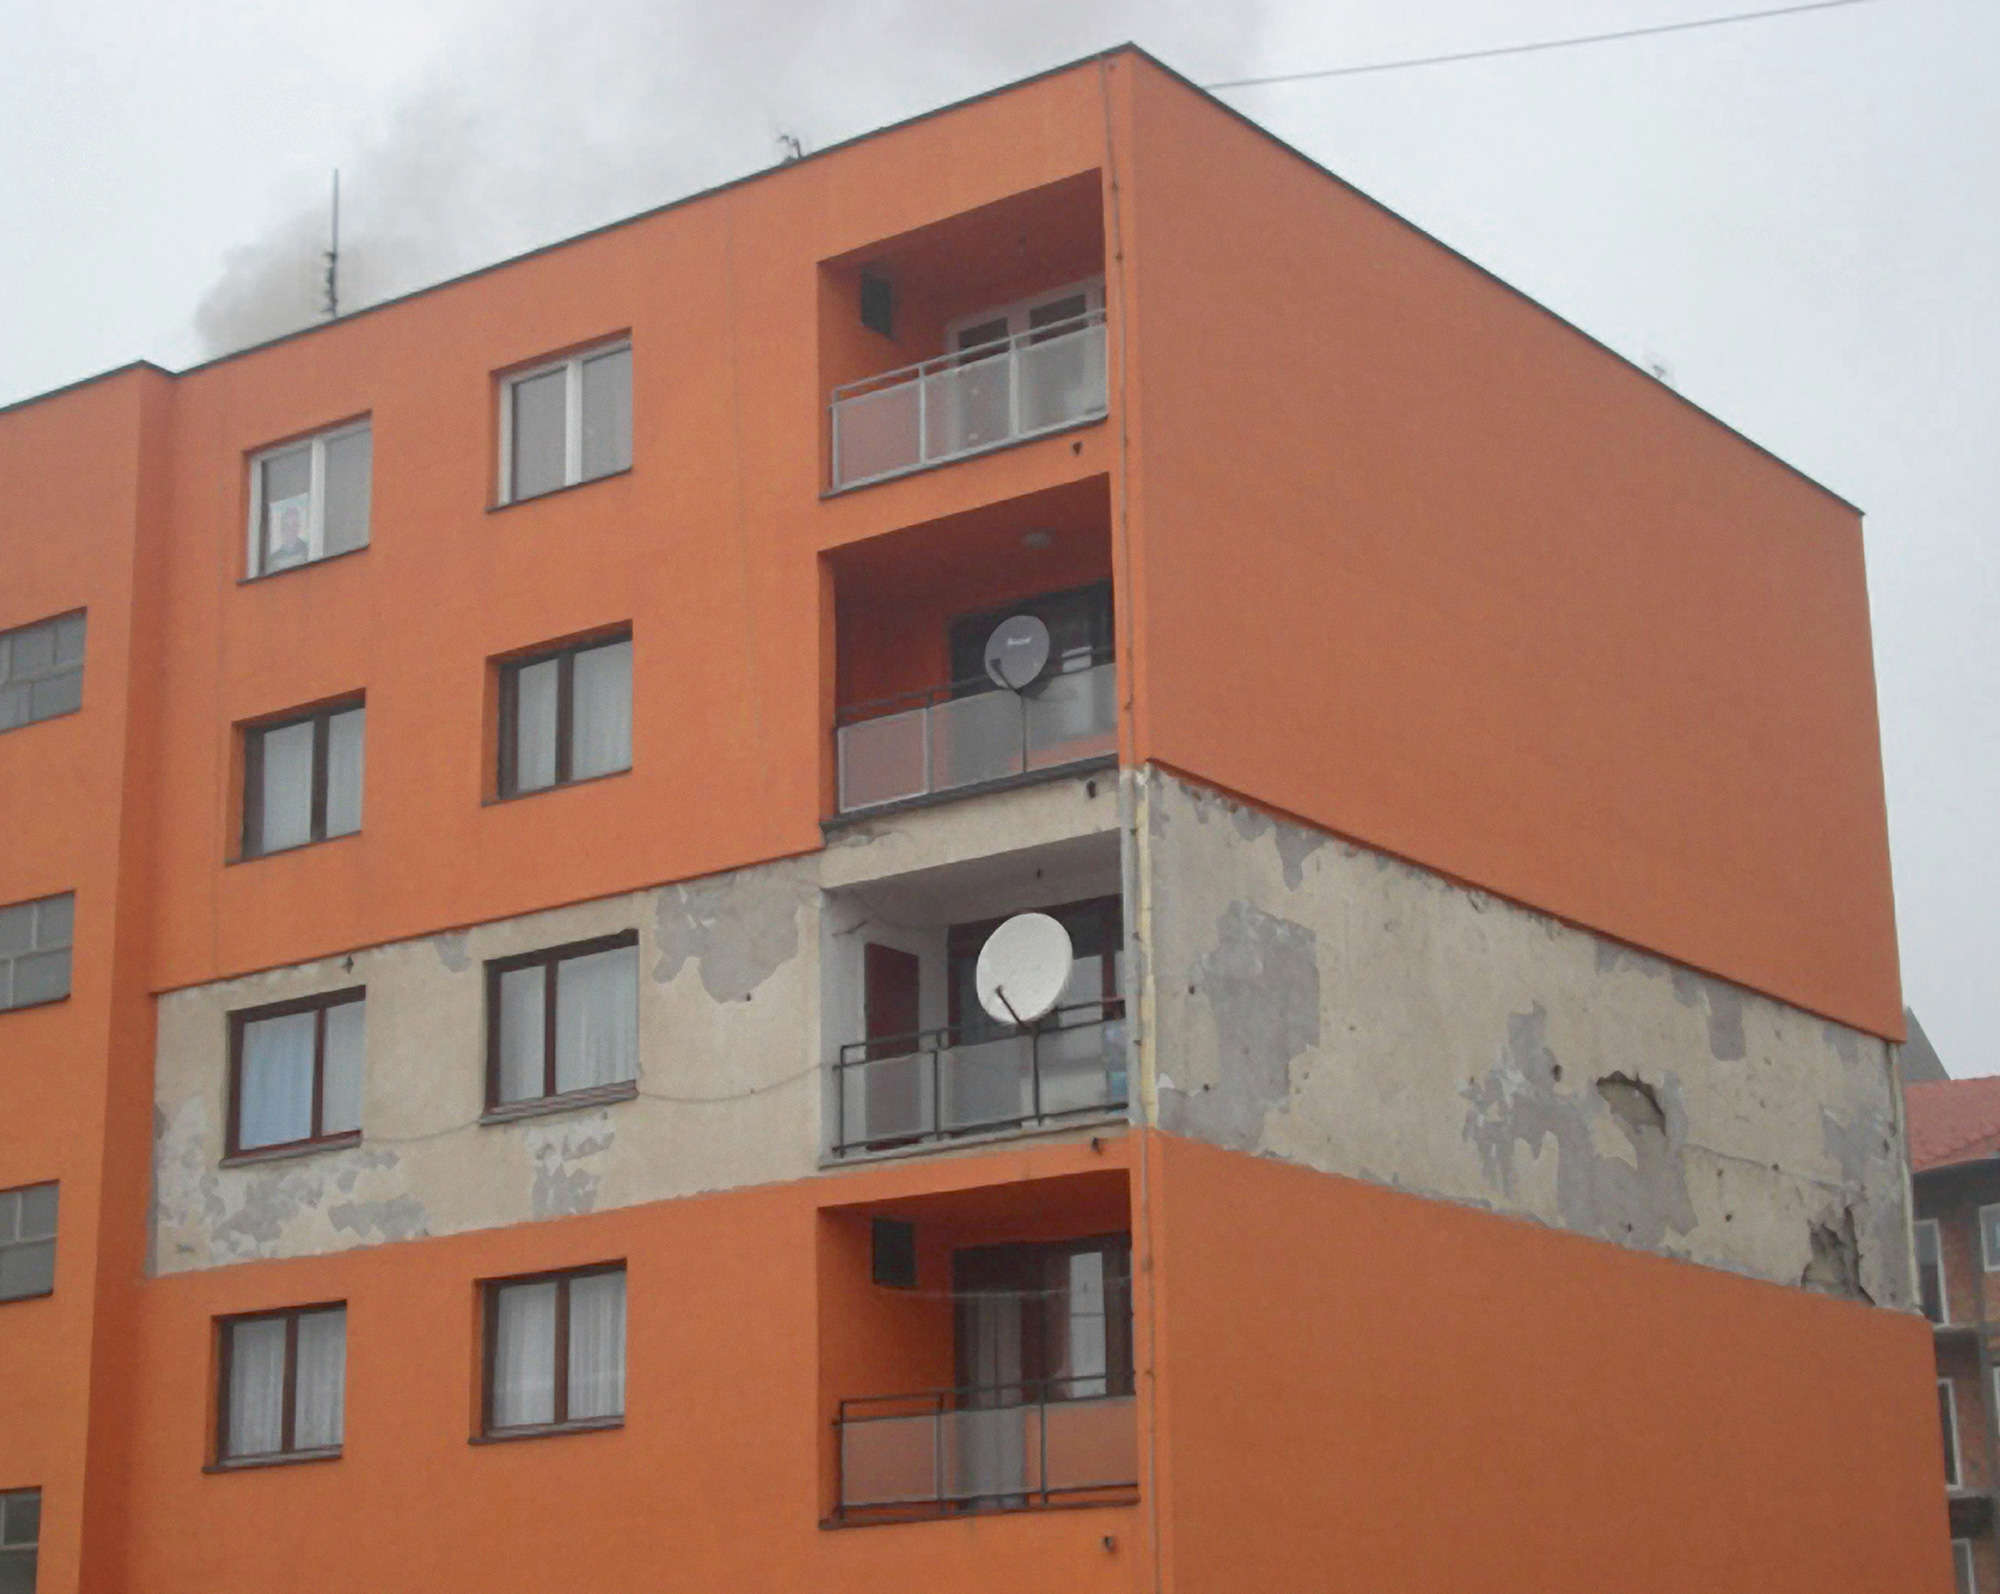 A two thousand and nine photo of the apartment building in Kalesija in the Federation of Bosnia and Herzegovina, where one residrnt has refused to have the facade of their portion of the building renovated. 